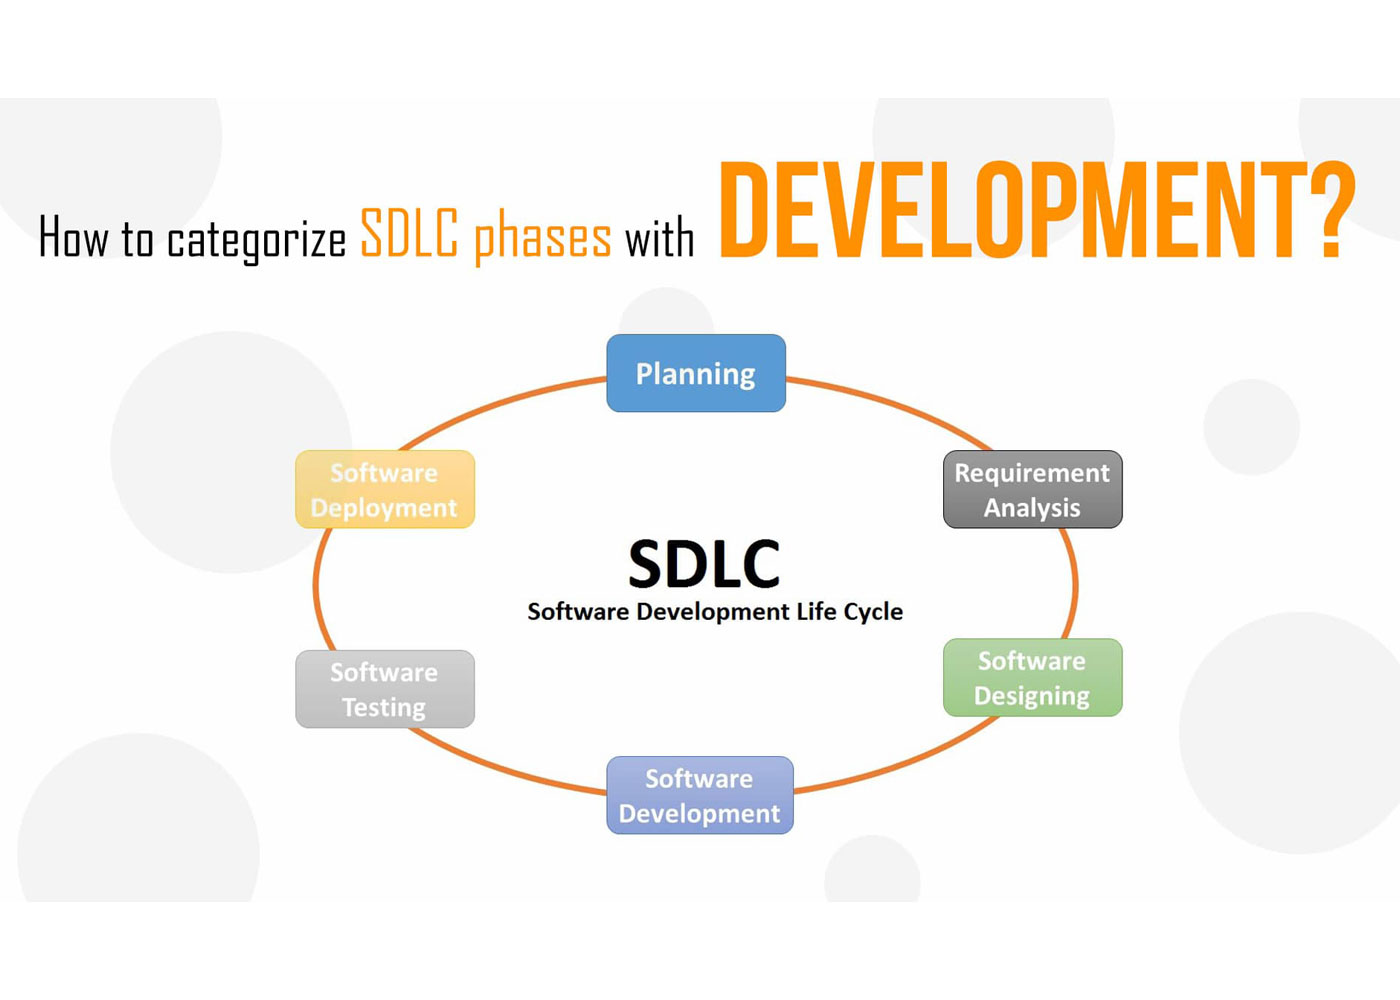 Software Development Lifecycle - Then and Now